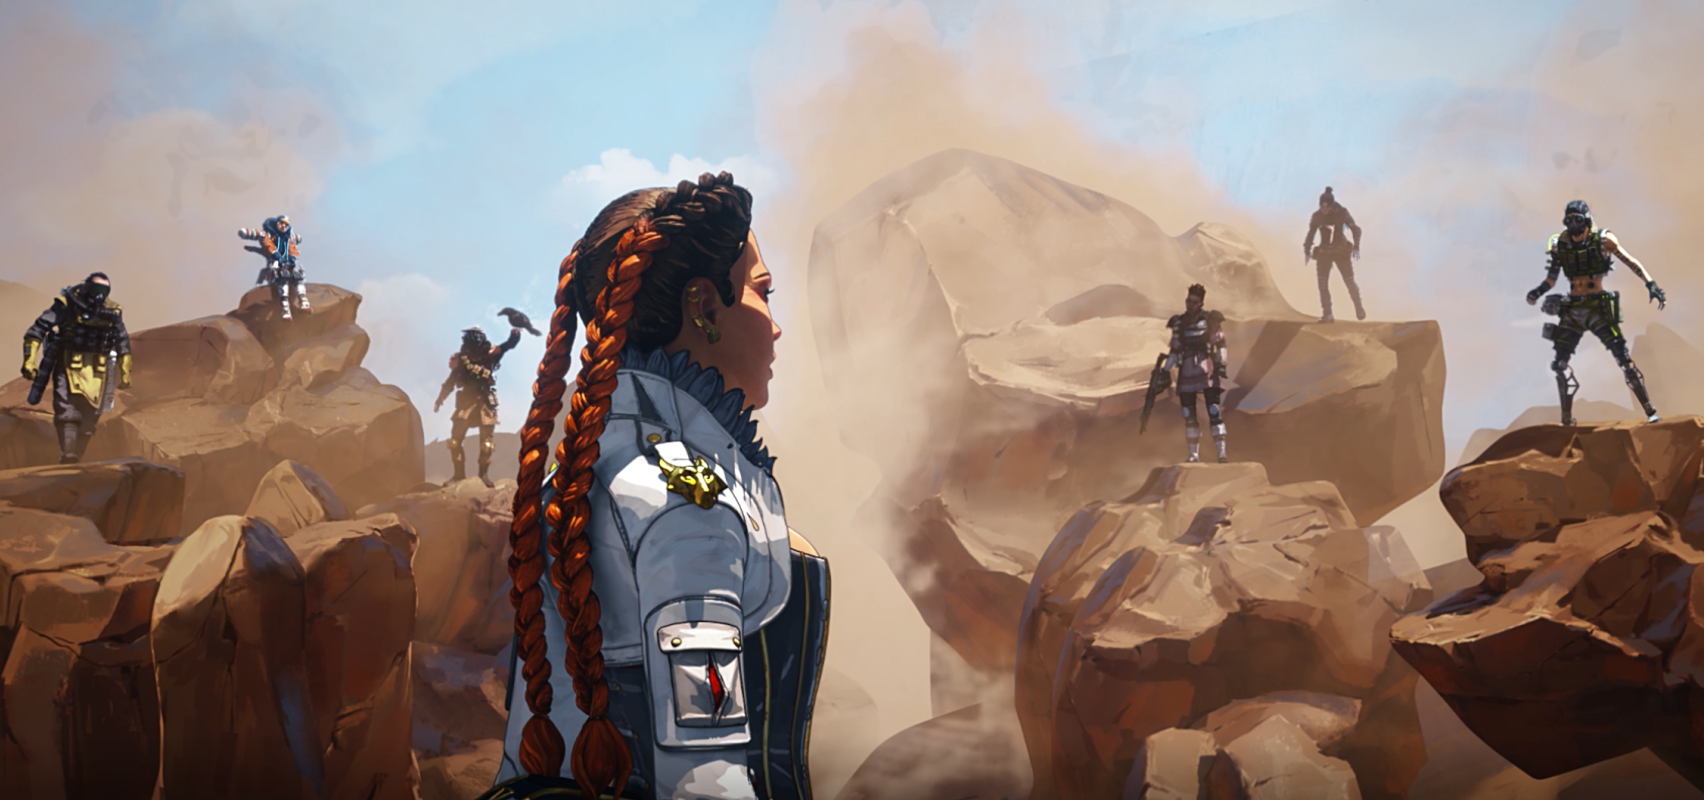 Loba Is Apex Legends' Next Character, Launching With Season 5 Next